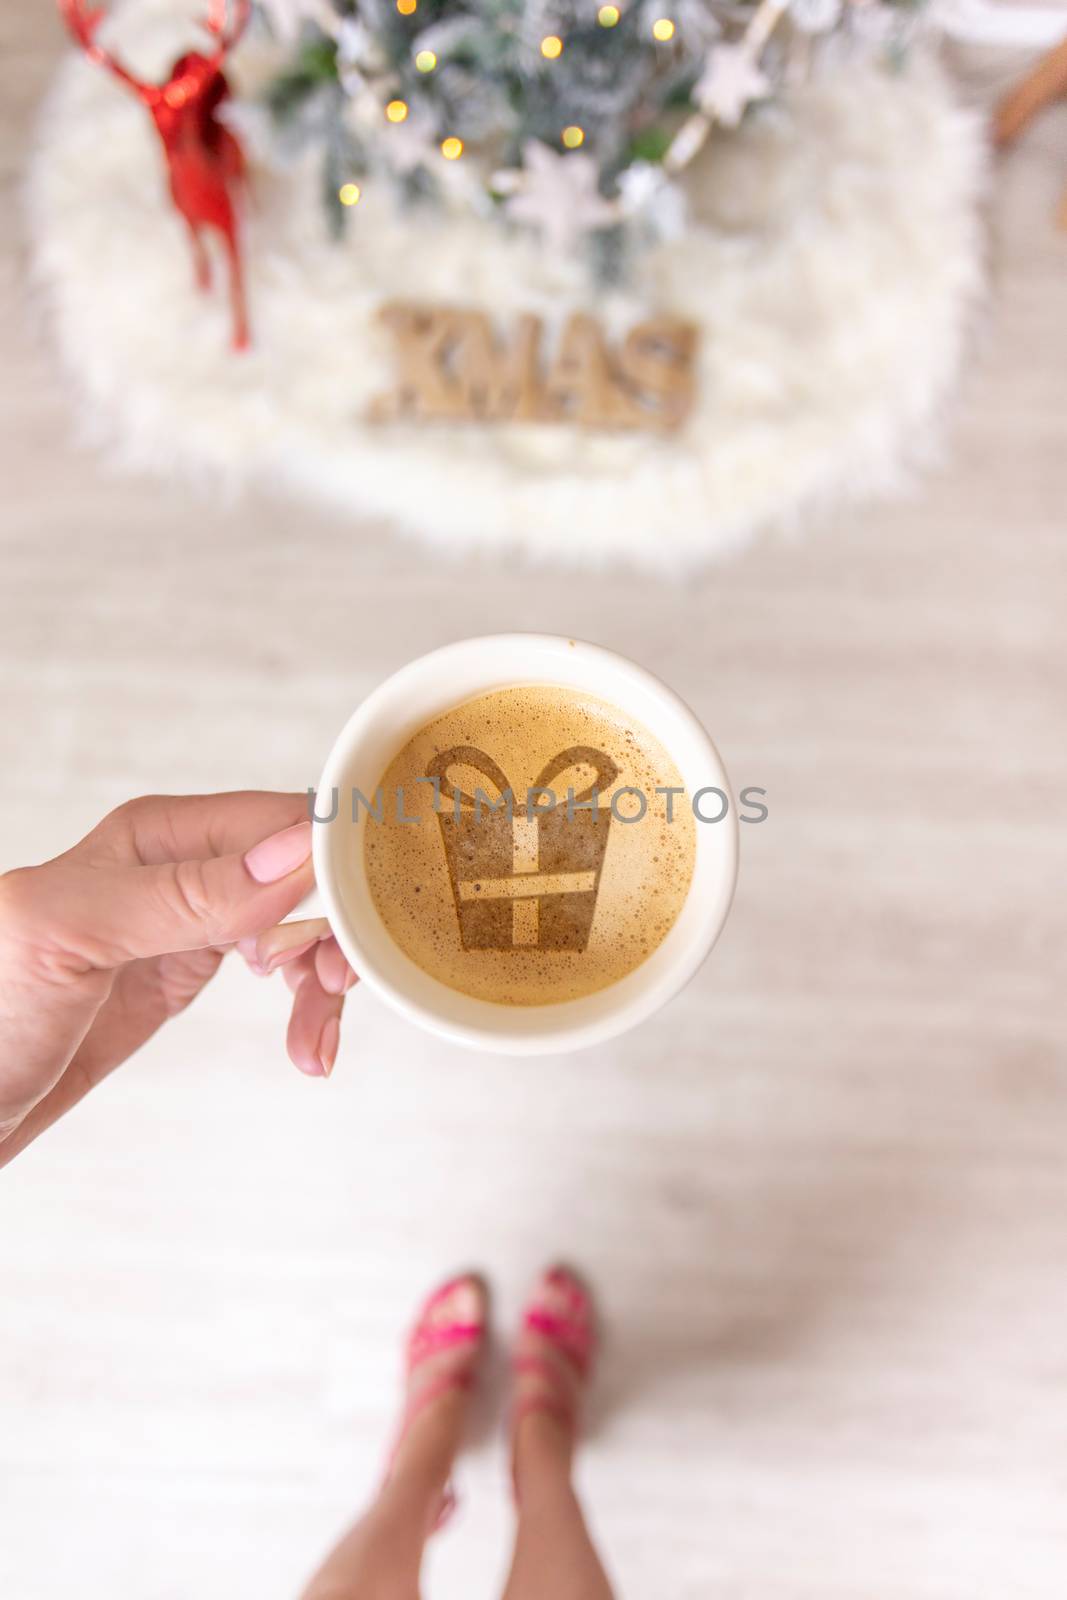 Hot coffee or spiced chai latte at Christmas time by lovleah